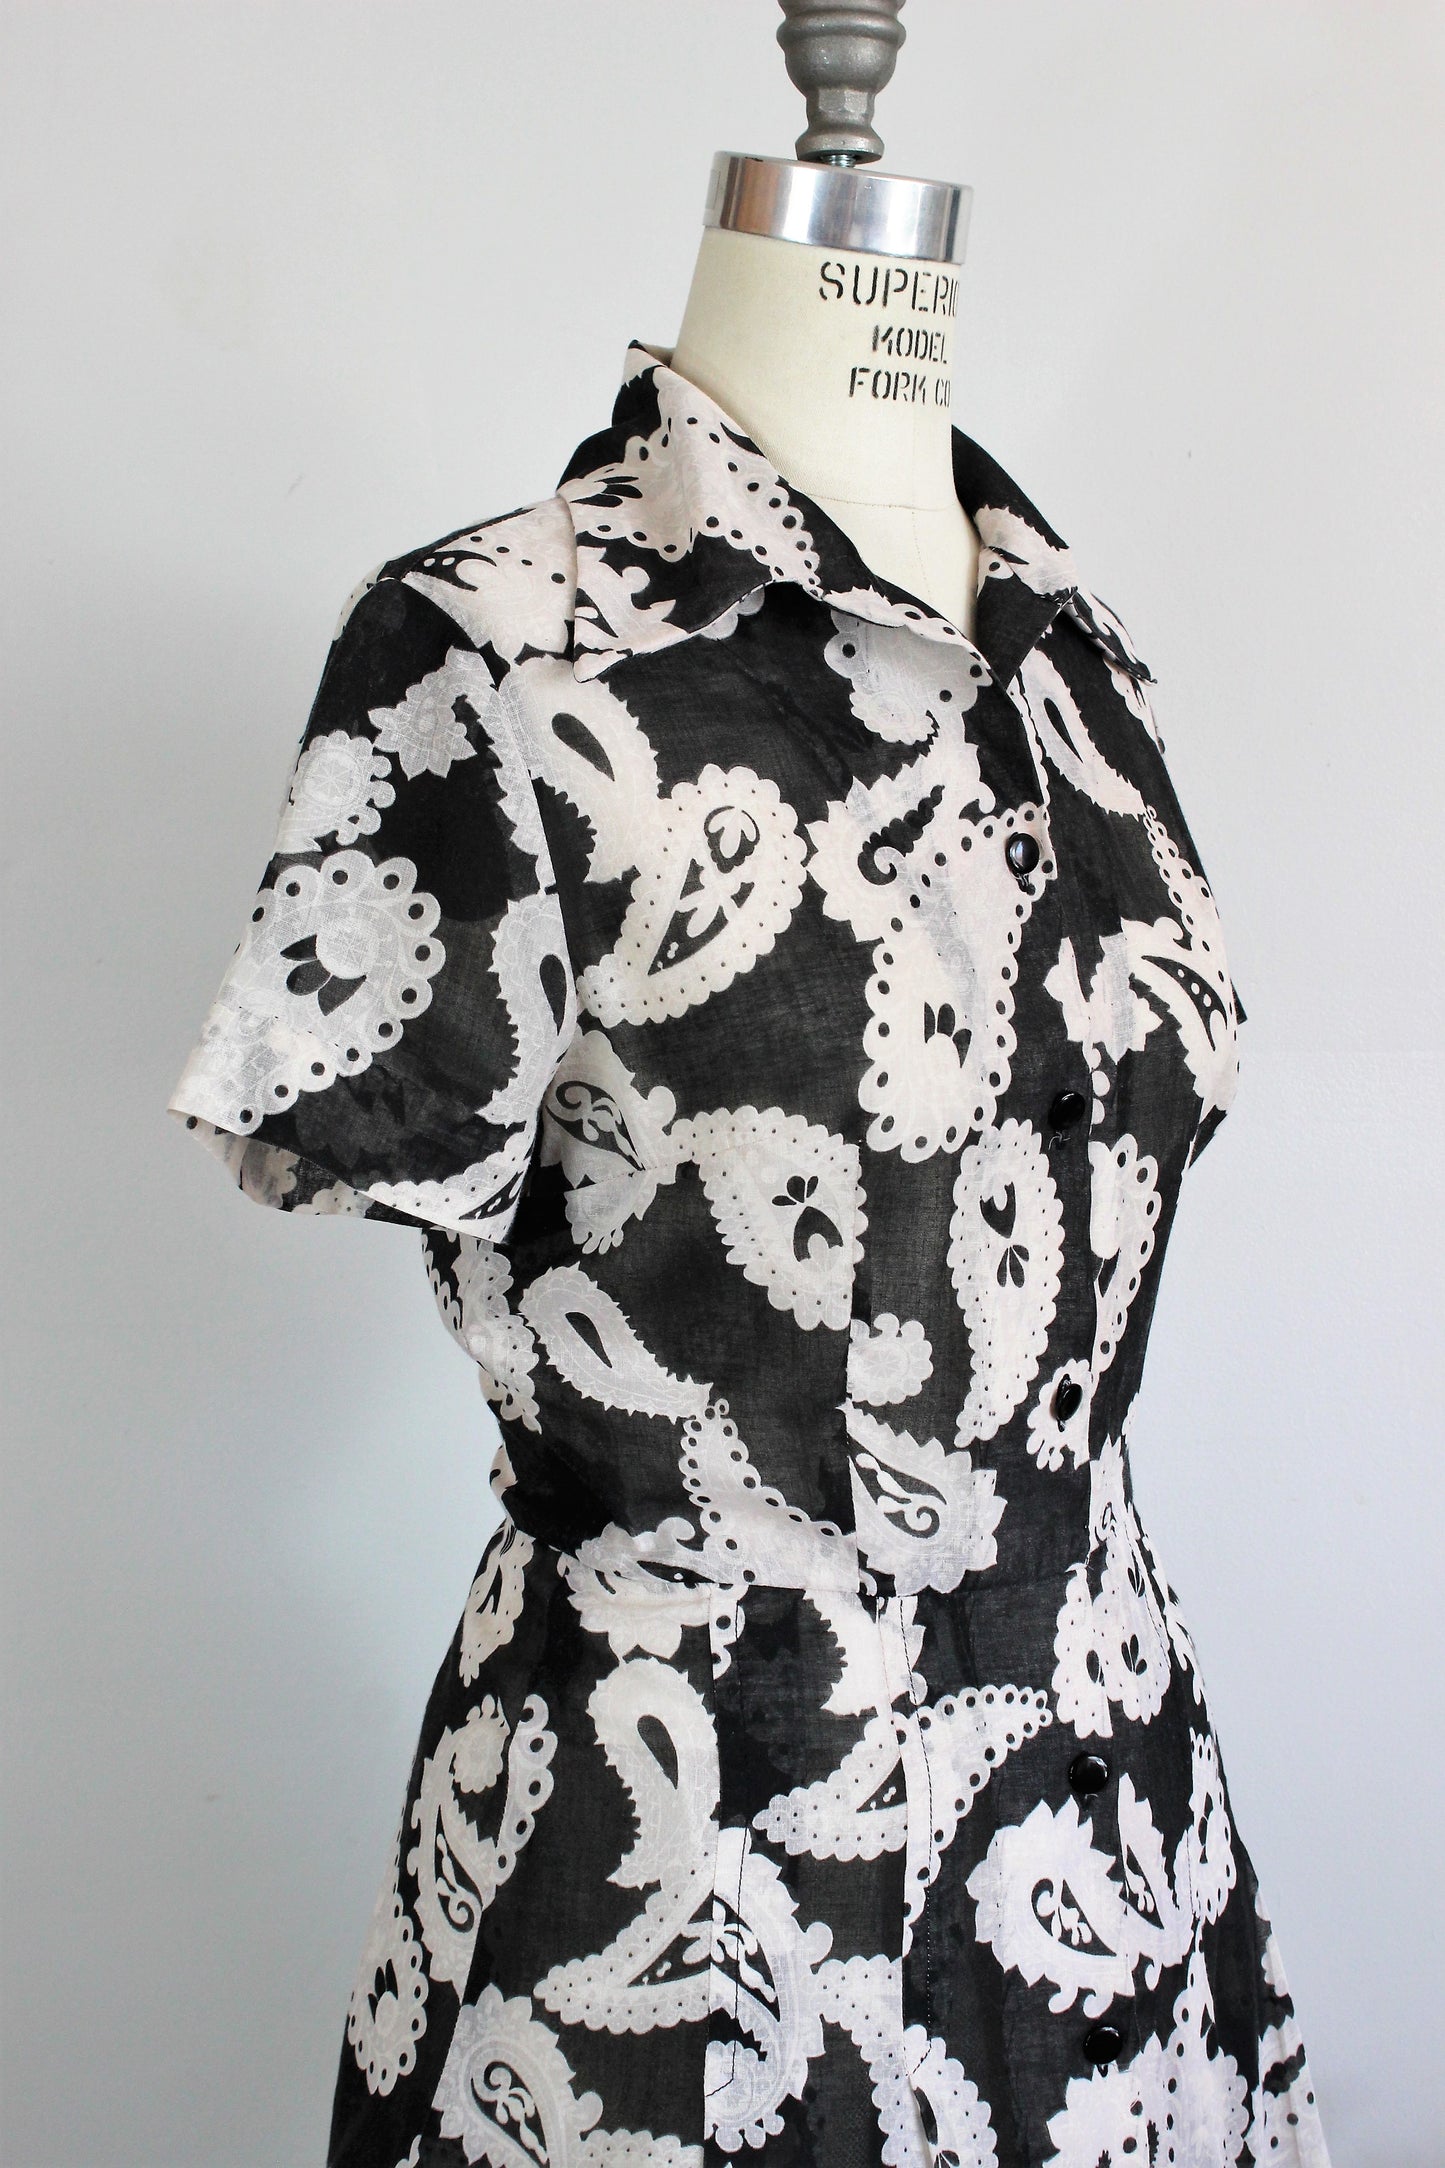 Vintage 1970s Does 1950s Shirtwaist Dress In A Black And White Paisley Print 